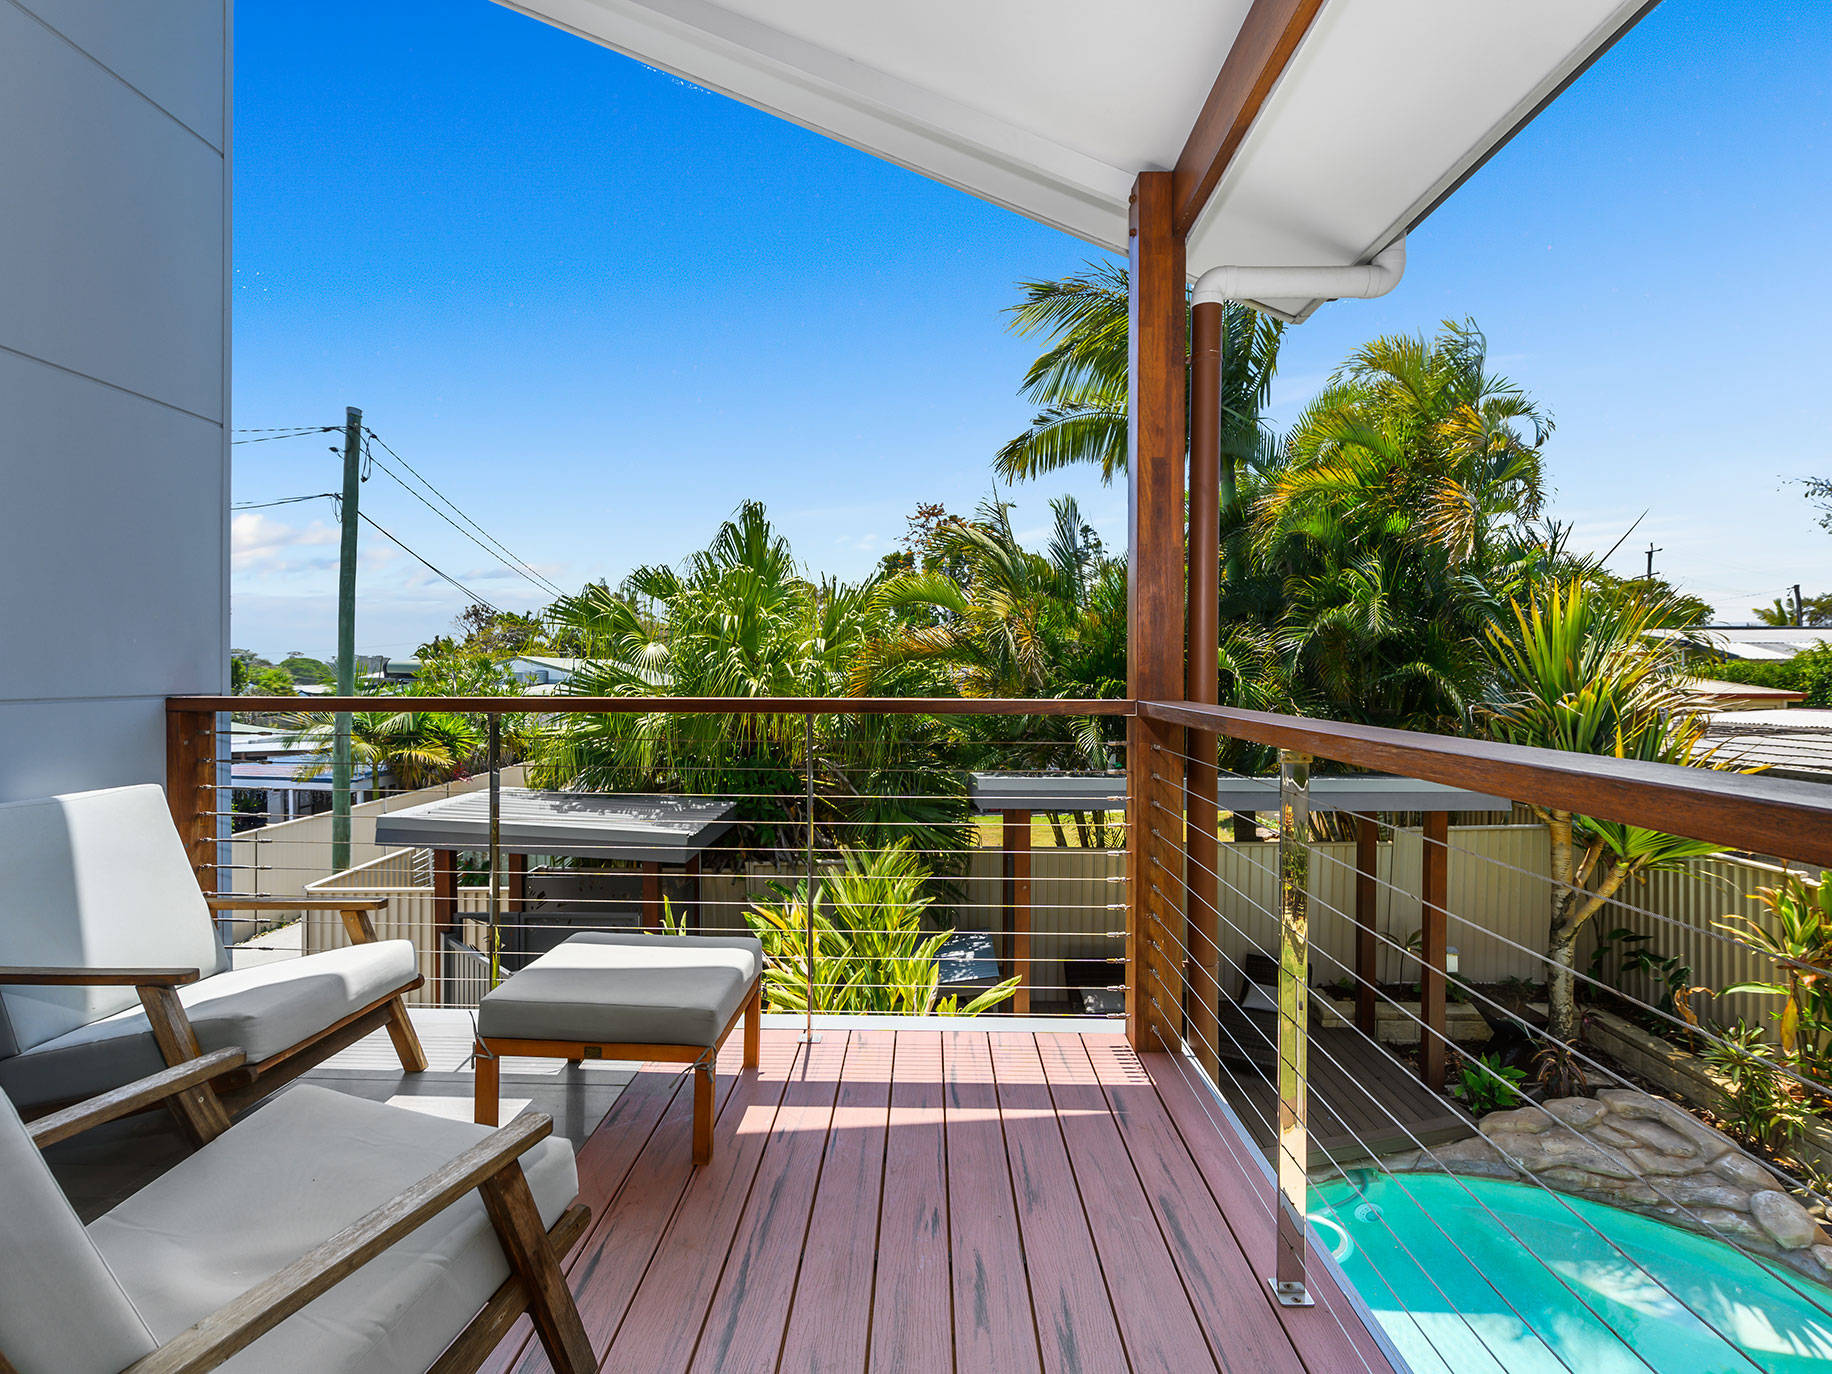 The veranda deck offers stunning Southern mountain views of the Springbrook escarpment and Mount Warning